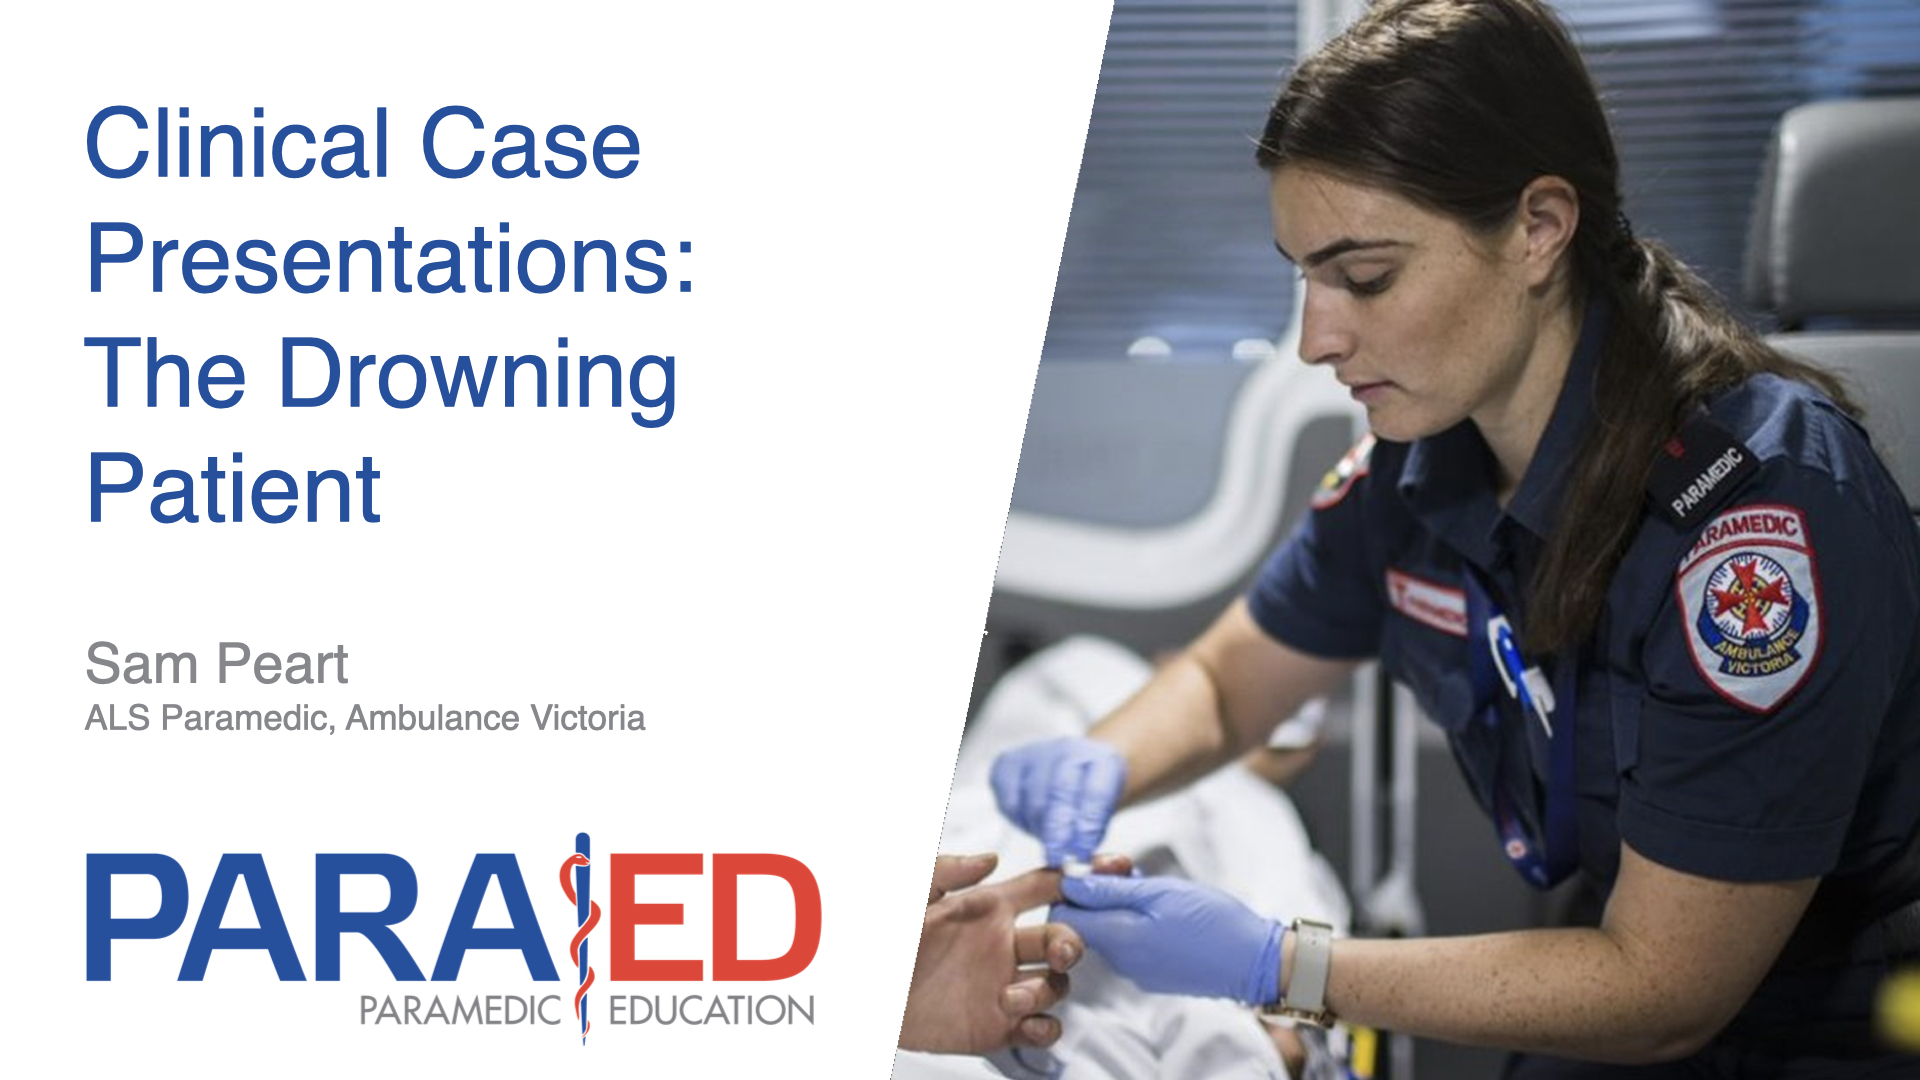 Clinical Case Presentations: The Drowning Patient